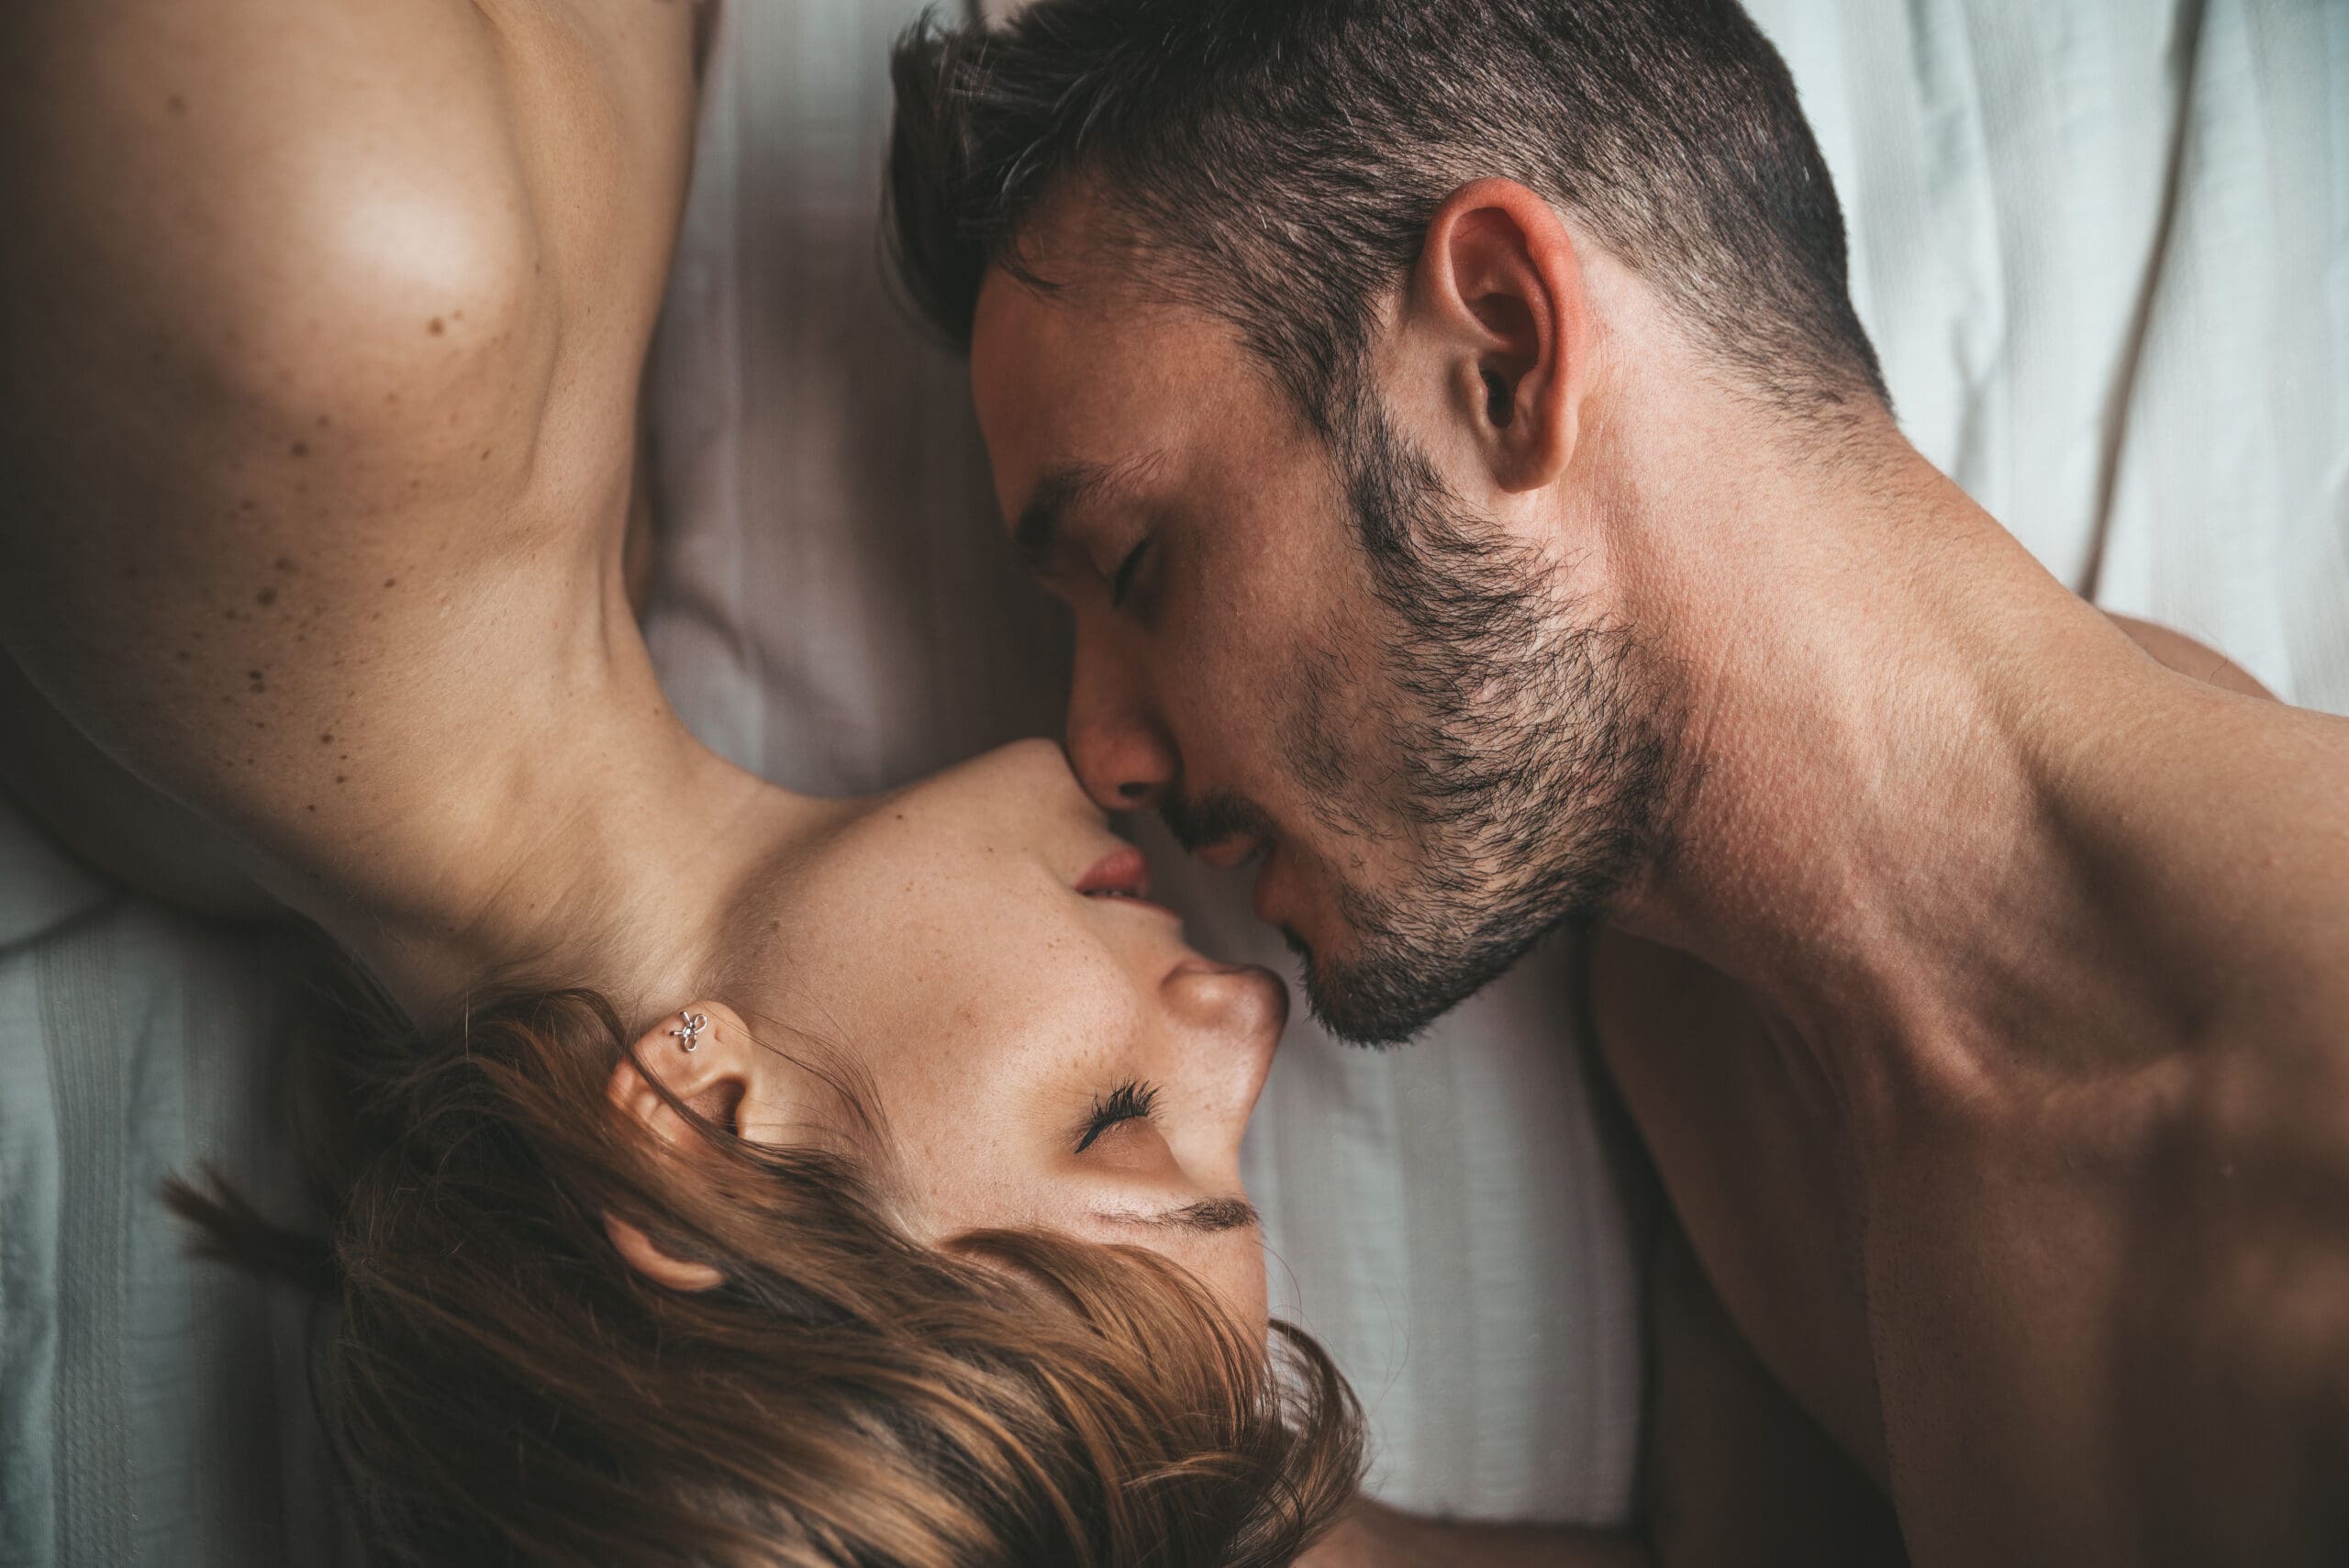 Sexual Health Awareness for you and your partner